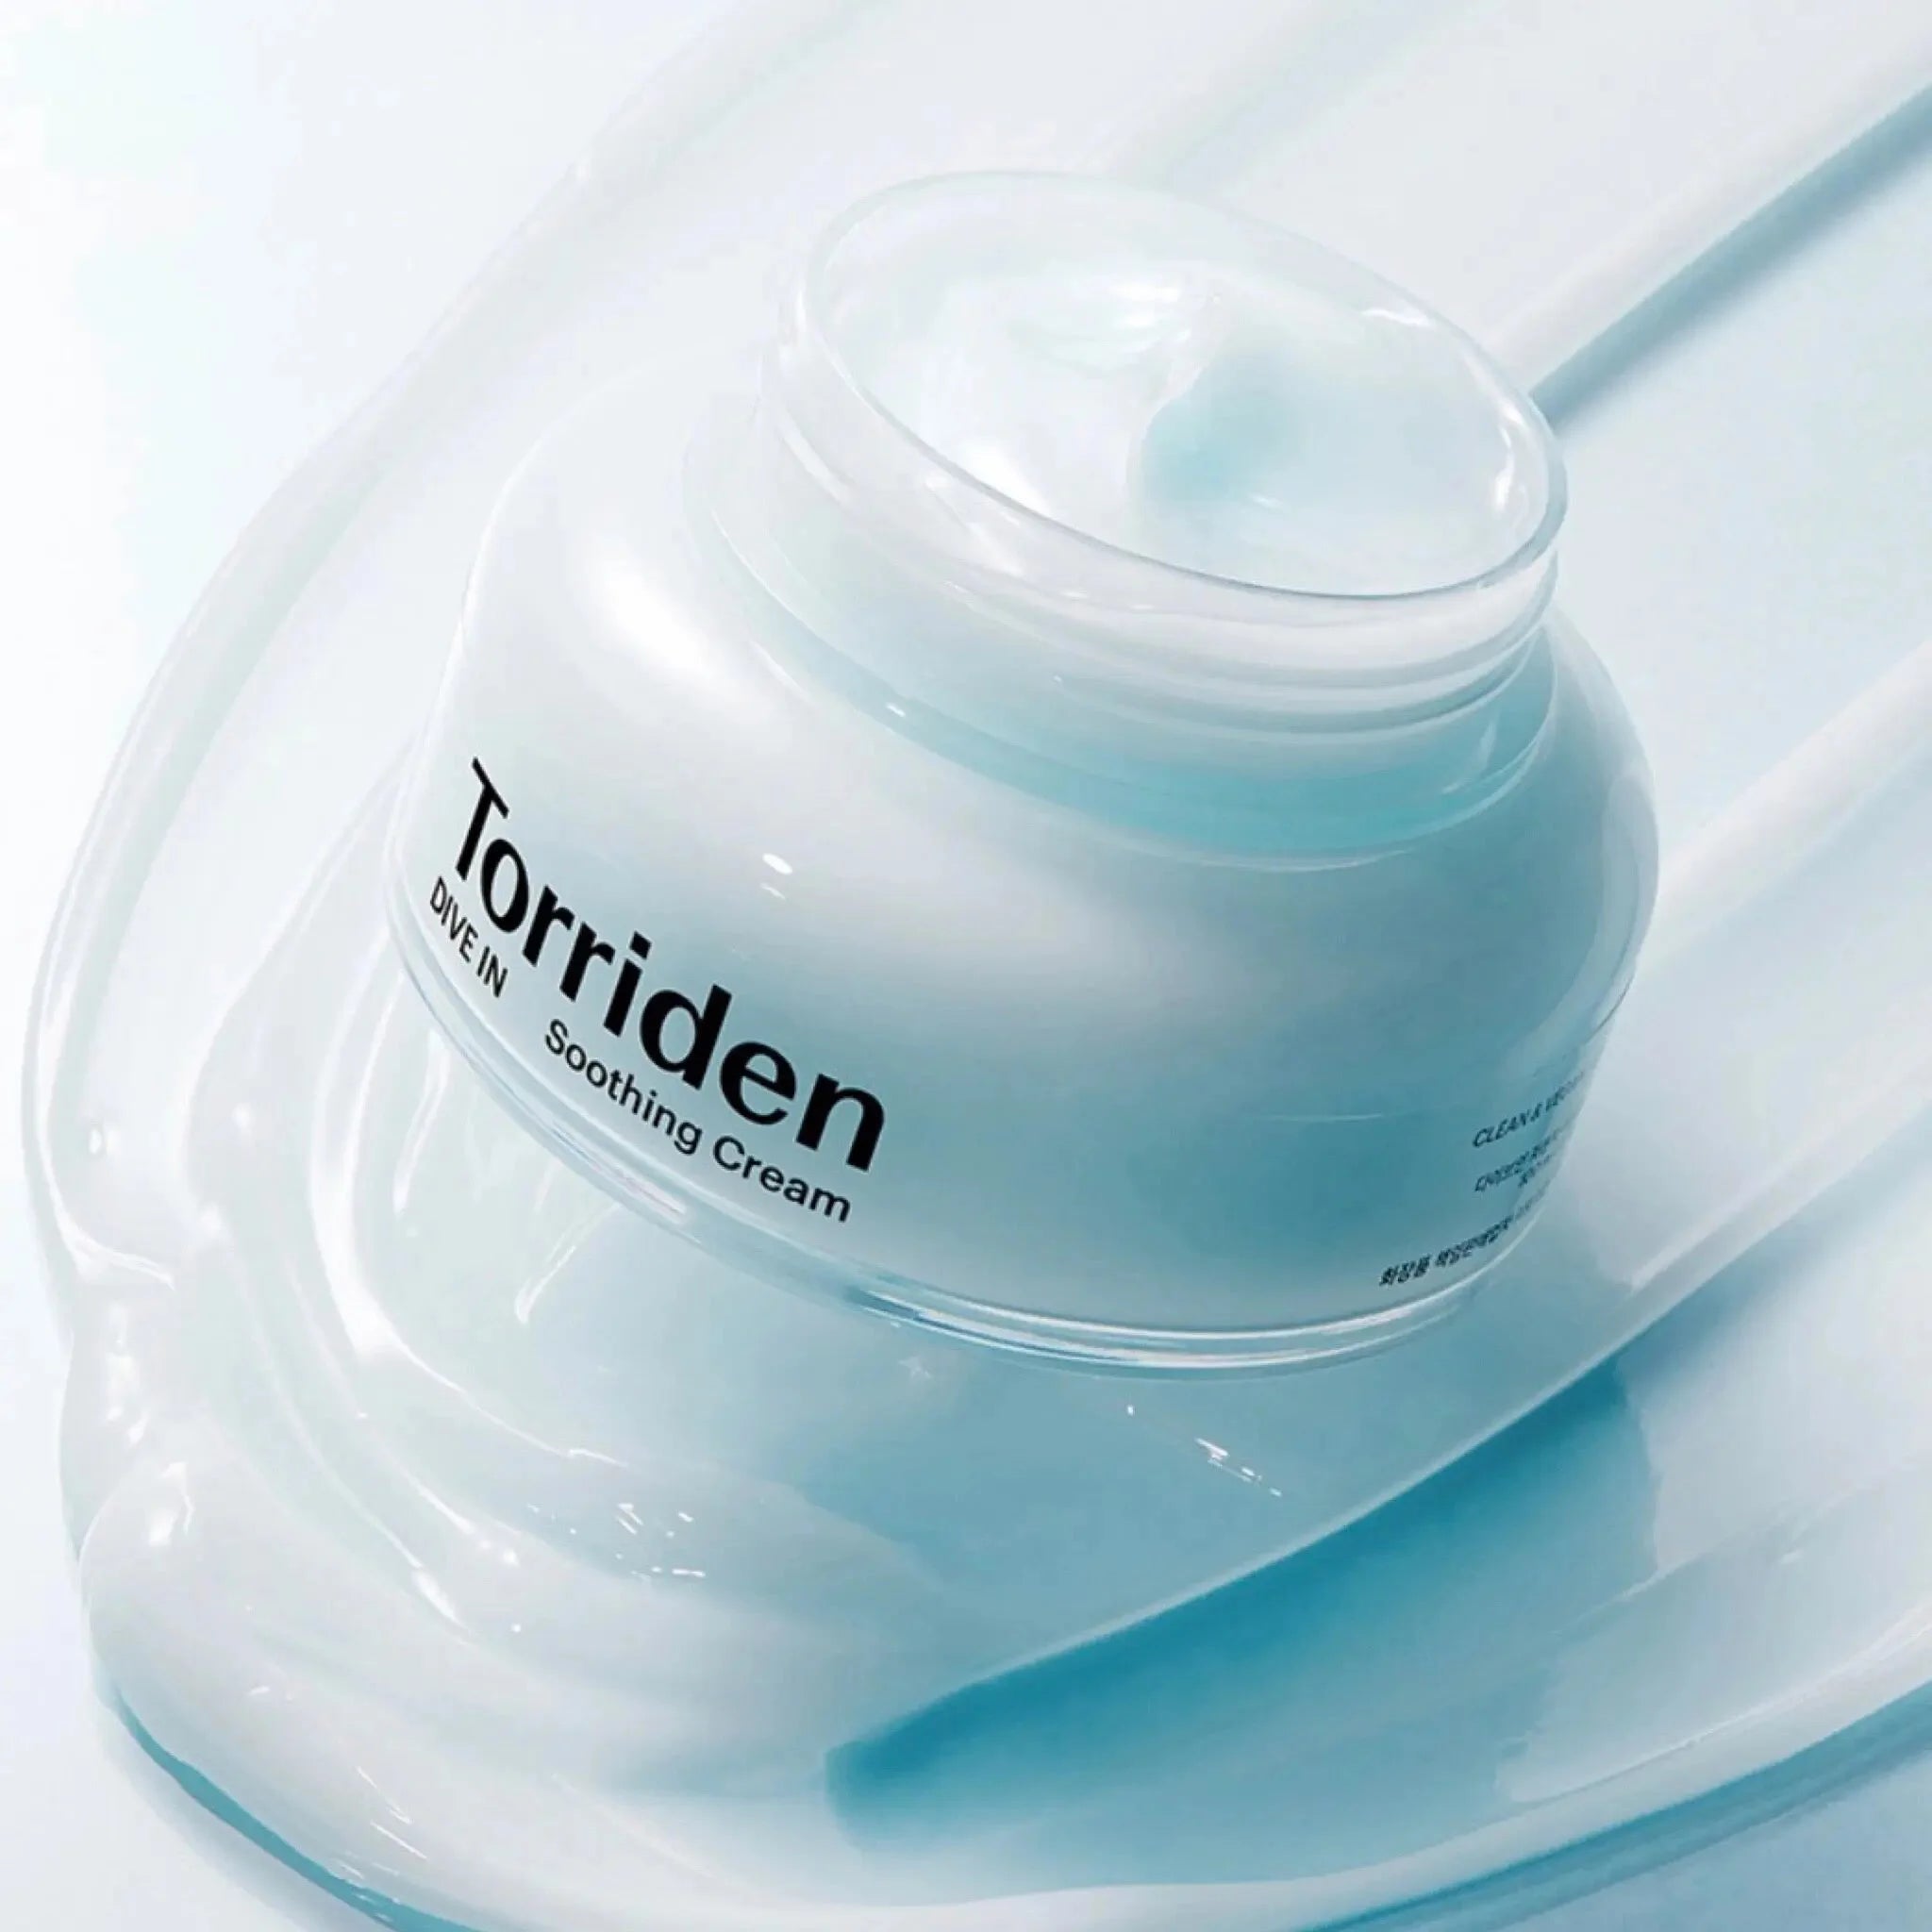 Torriden DIVE-IN Low Molecular Hyaluronic Acid Soothing Cream best vegan cruelty-free Korean moisturizer for dry dehydrated mature skin fine lines wrinkles fast-absobing non-oily non-comedogenic K Beauty World